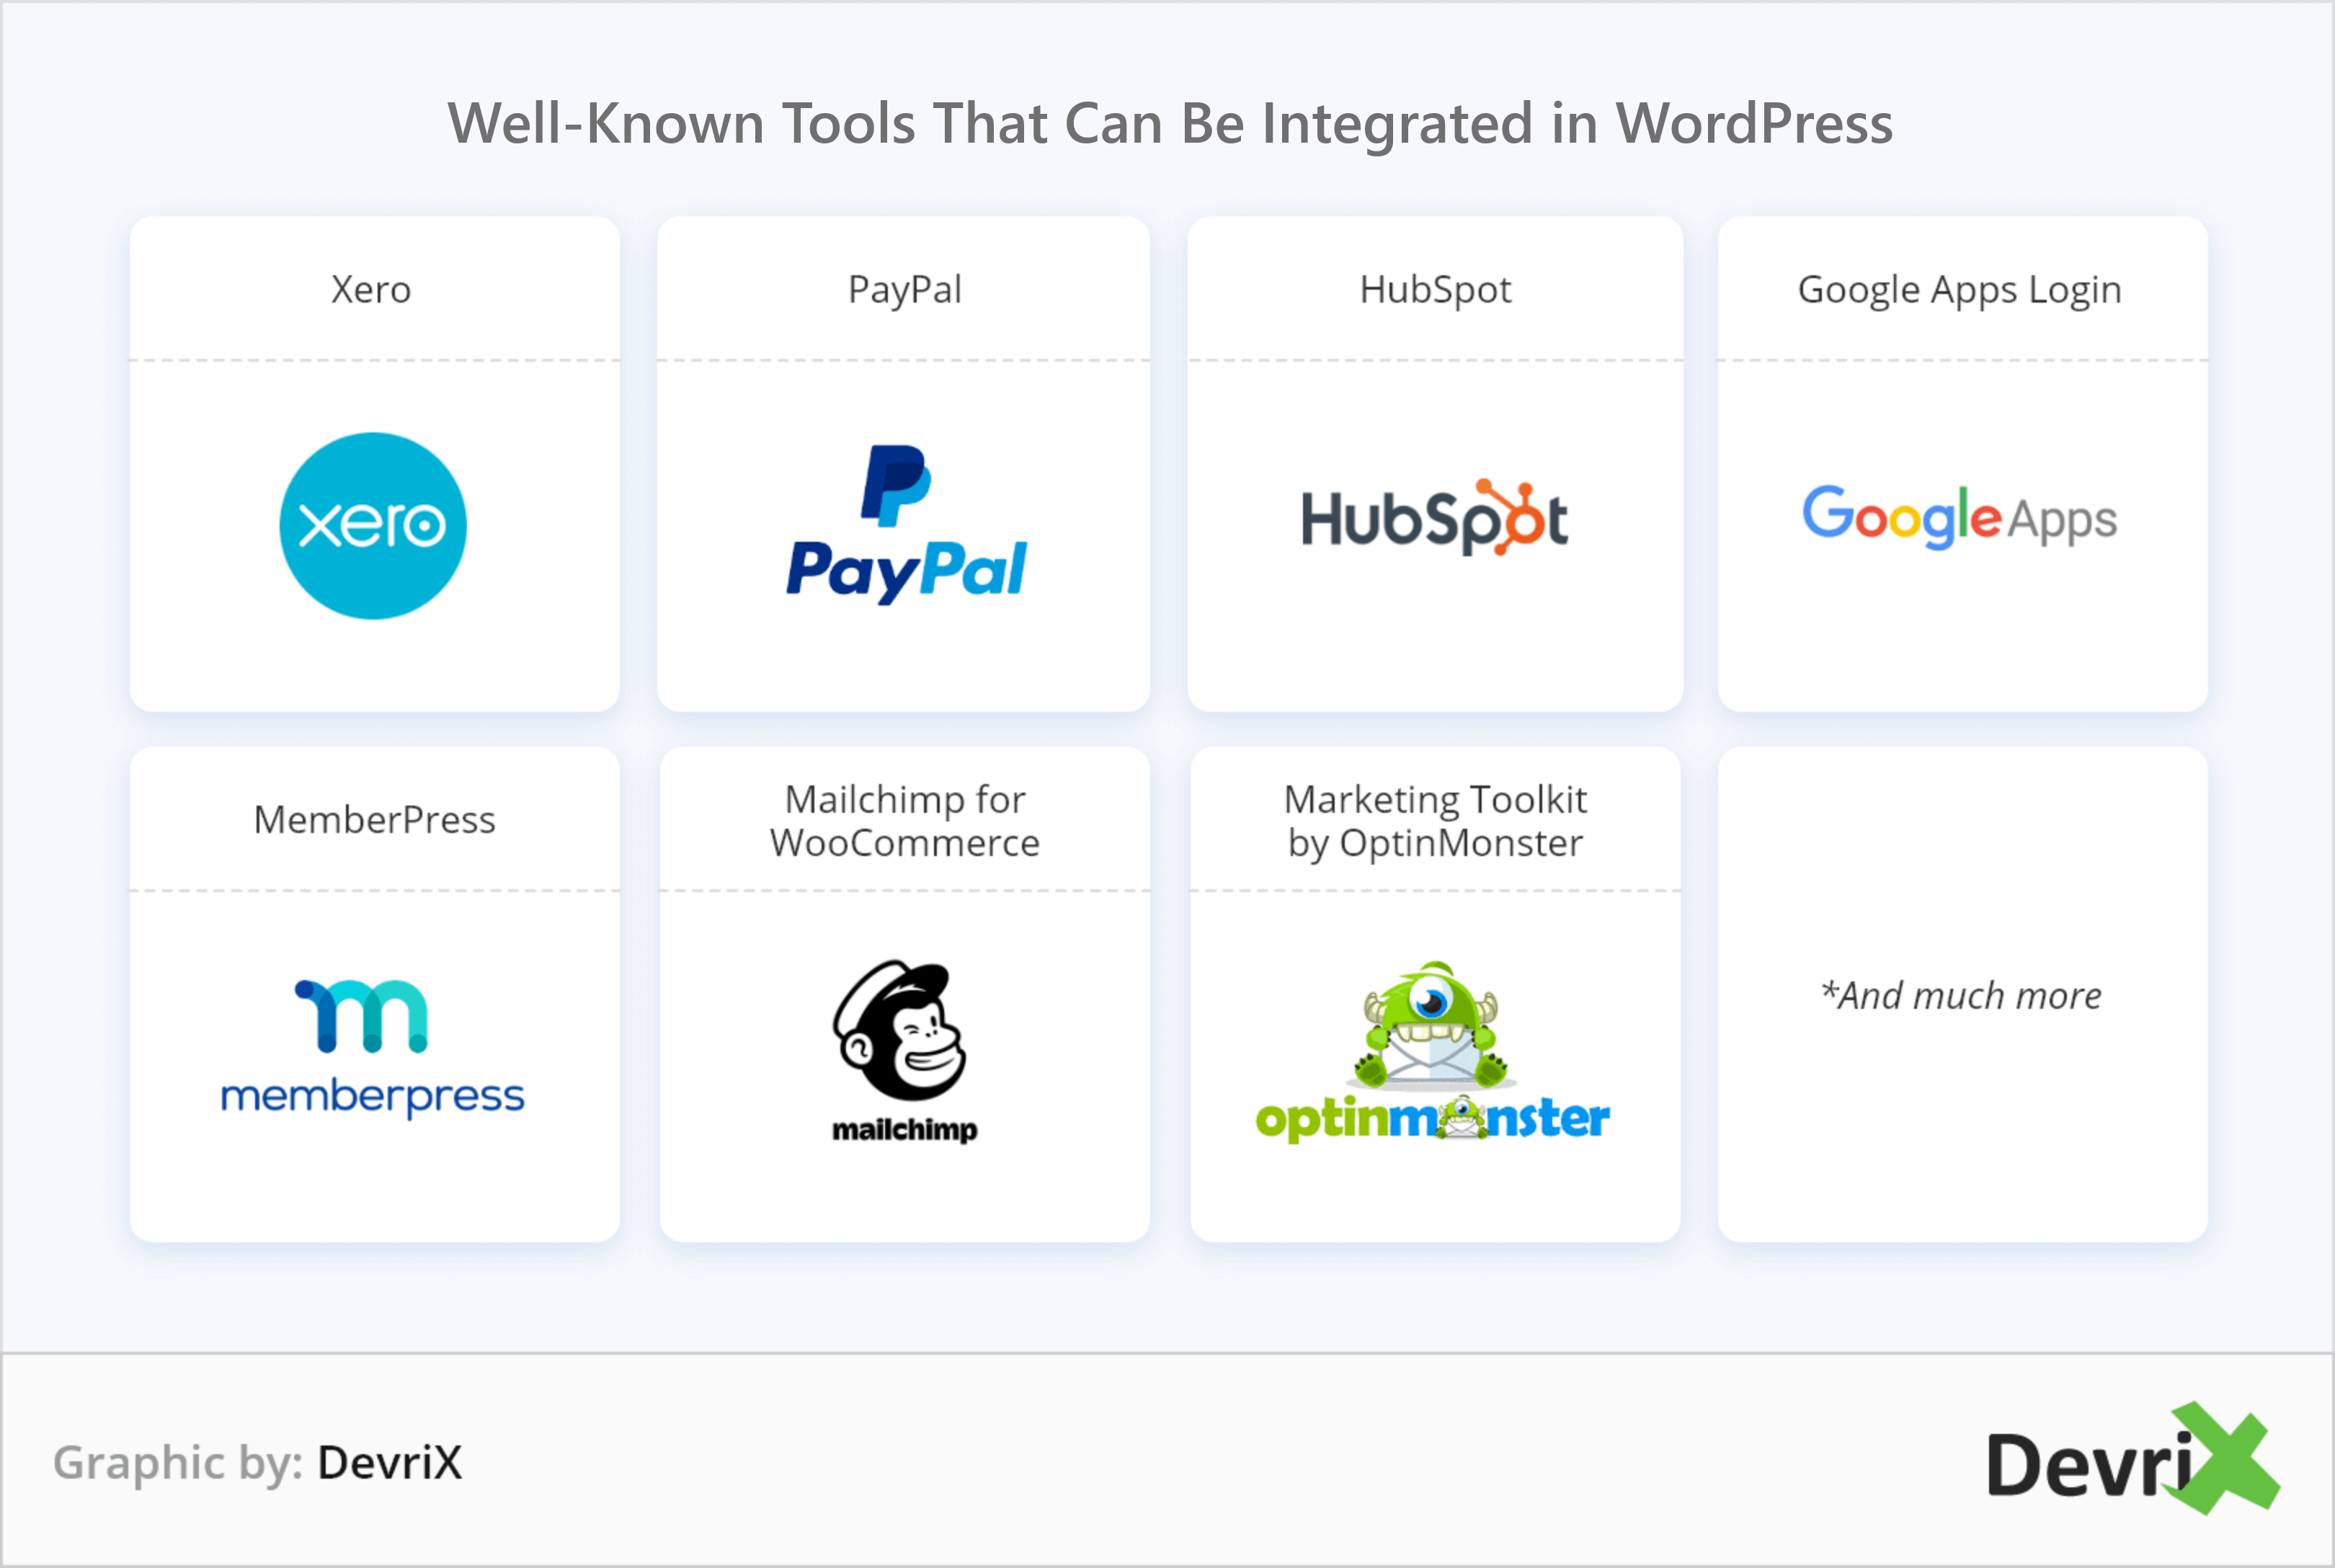 Well-known Tools That Can Be Integrated in WordPress